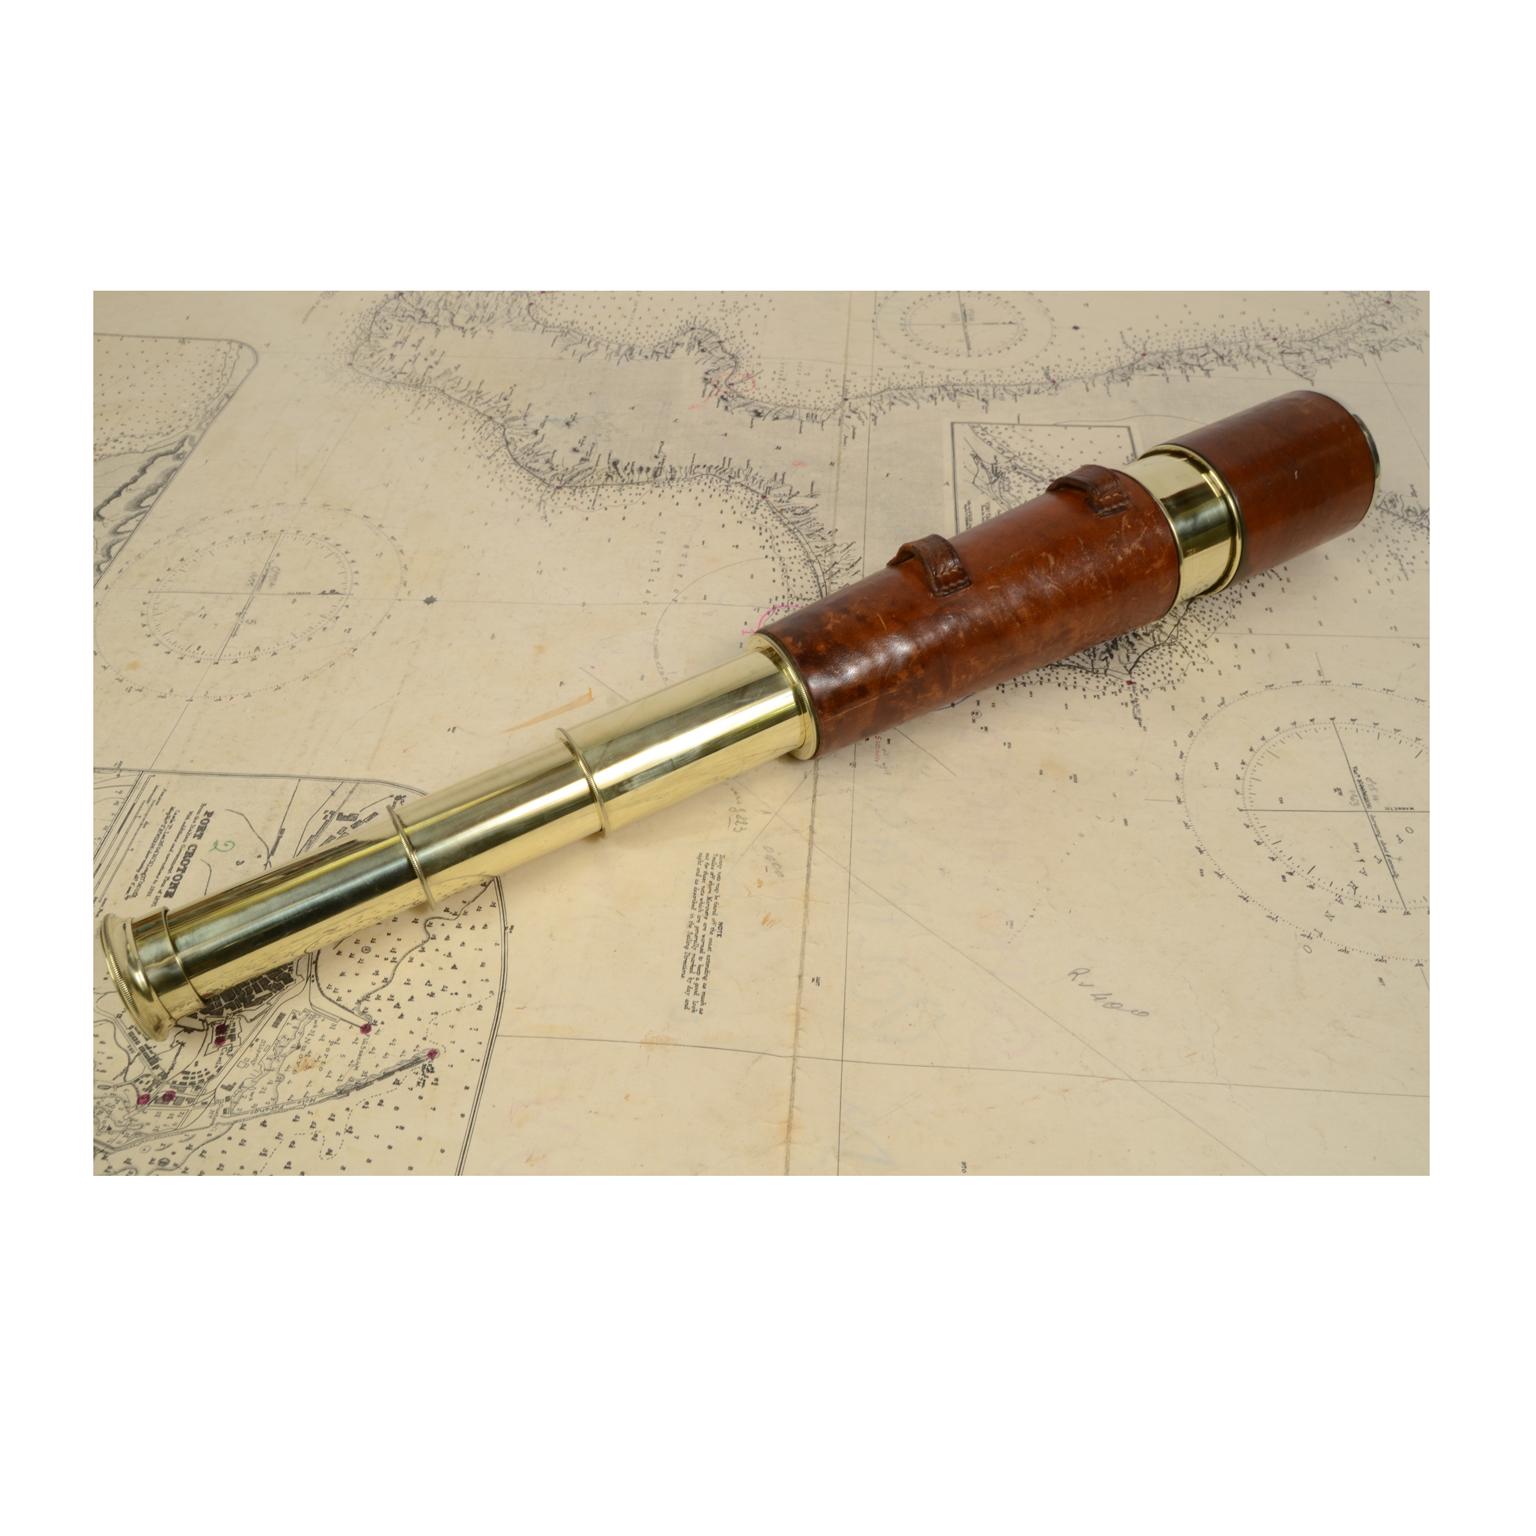 British Antique Nautical Telescope, Brass and Leather, Early 1900s